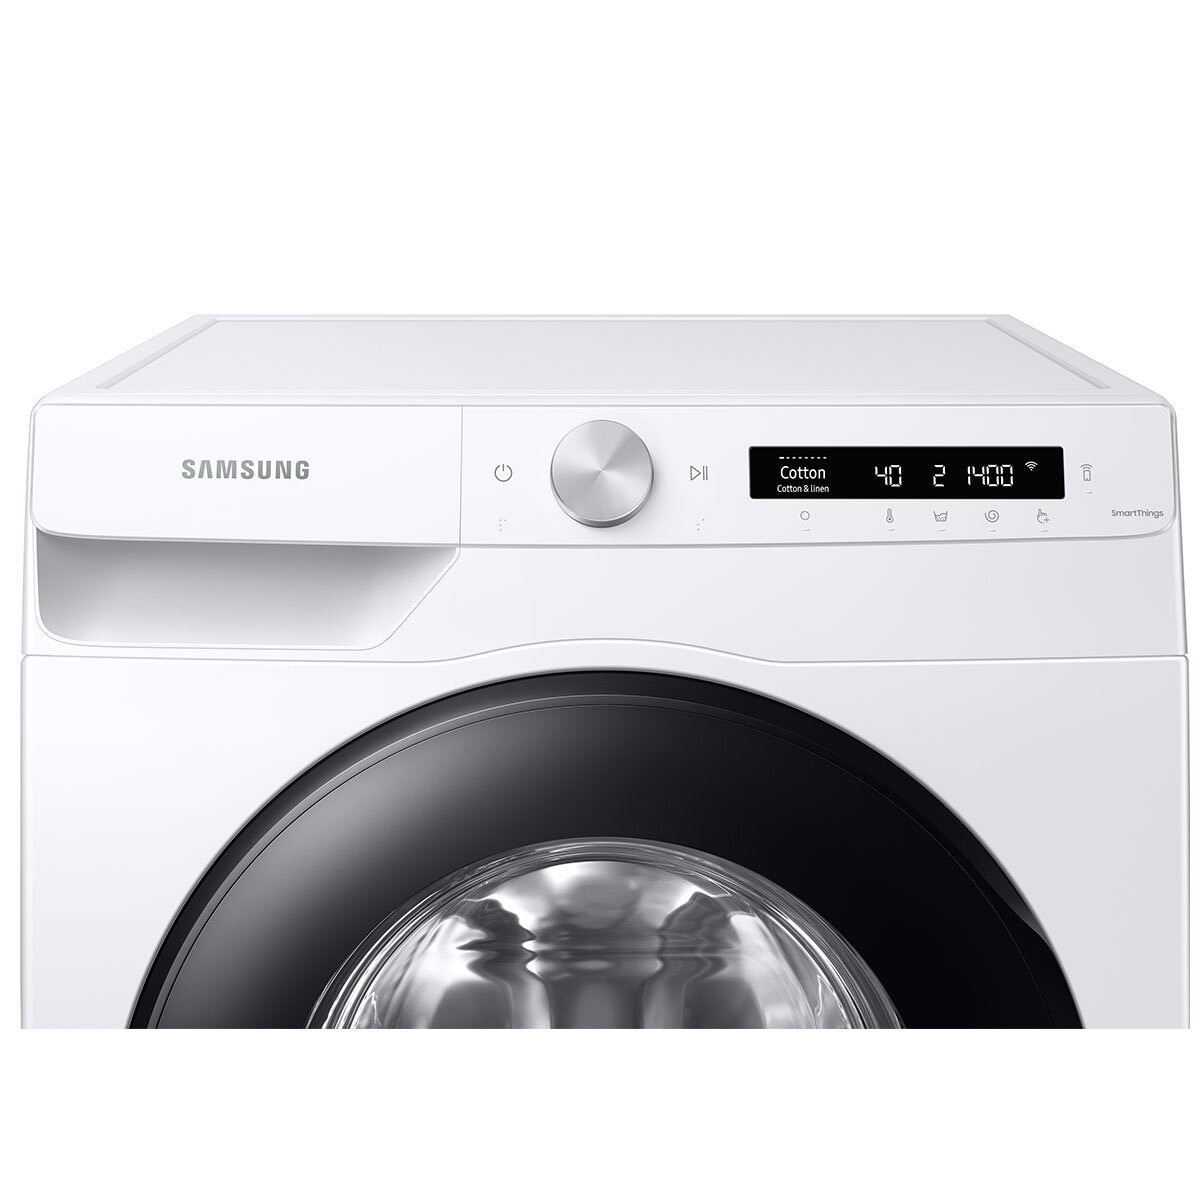 Samsung 9kg Front Load Smart Washer with Steam Wash Cycle WW90T504DAW